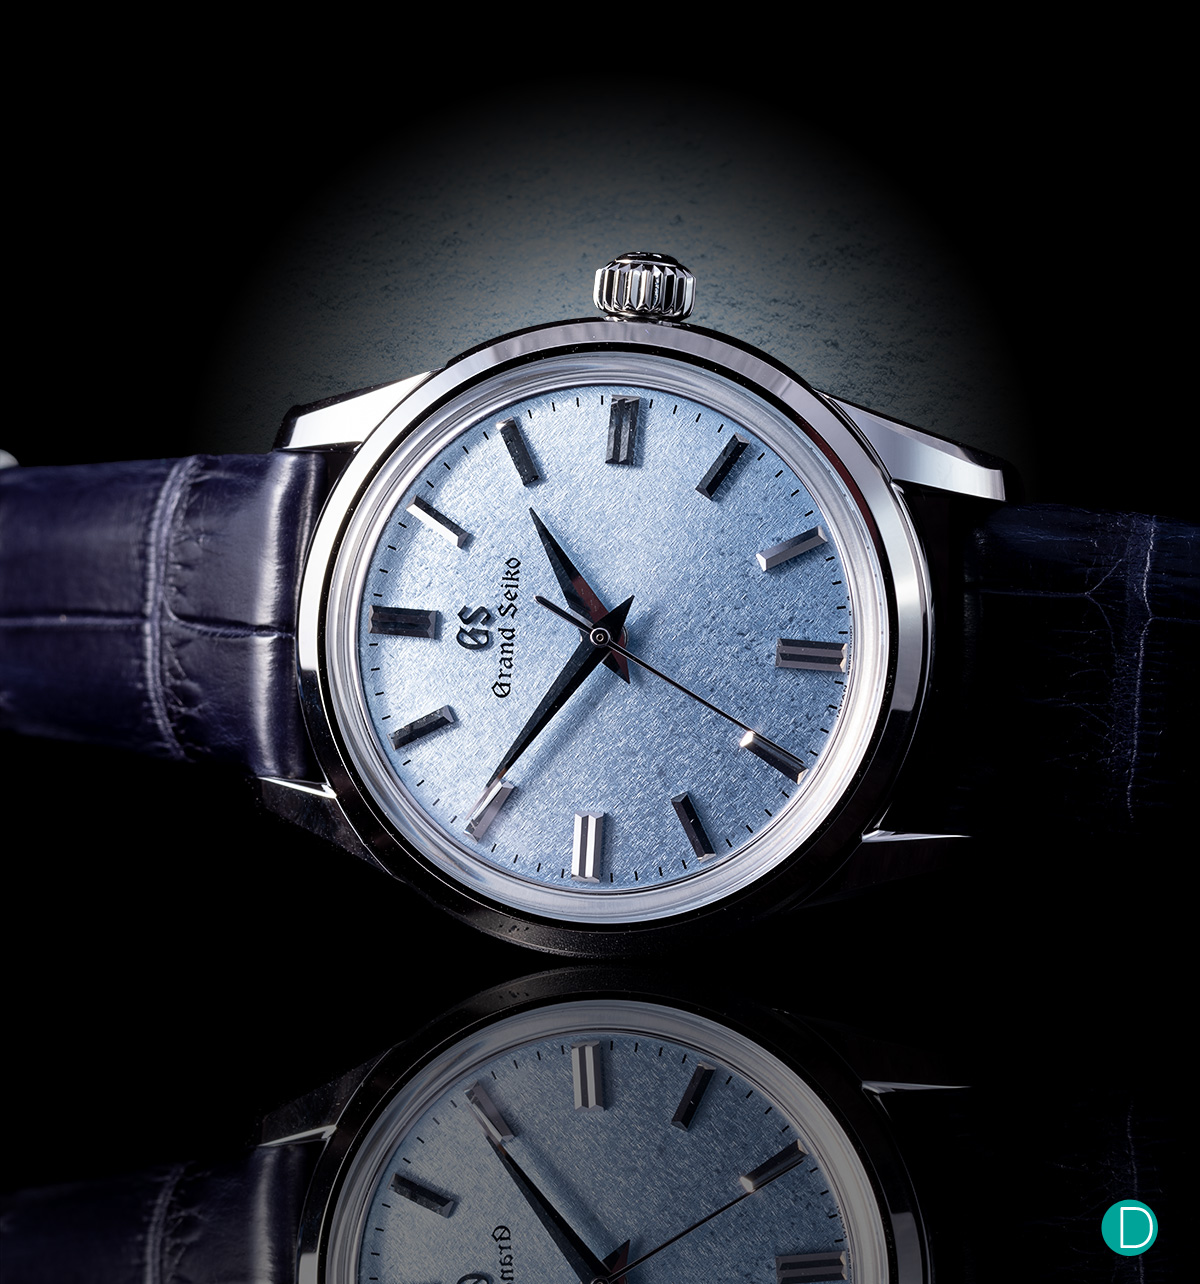 Review: The new Grand Seiko SBGW283 -